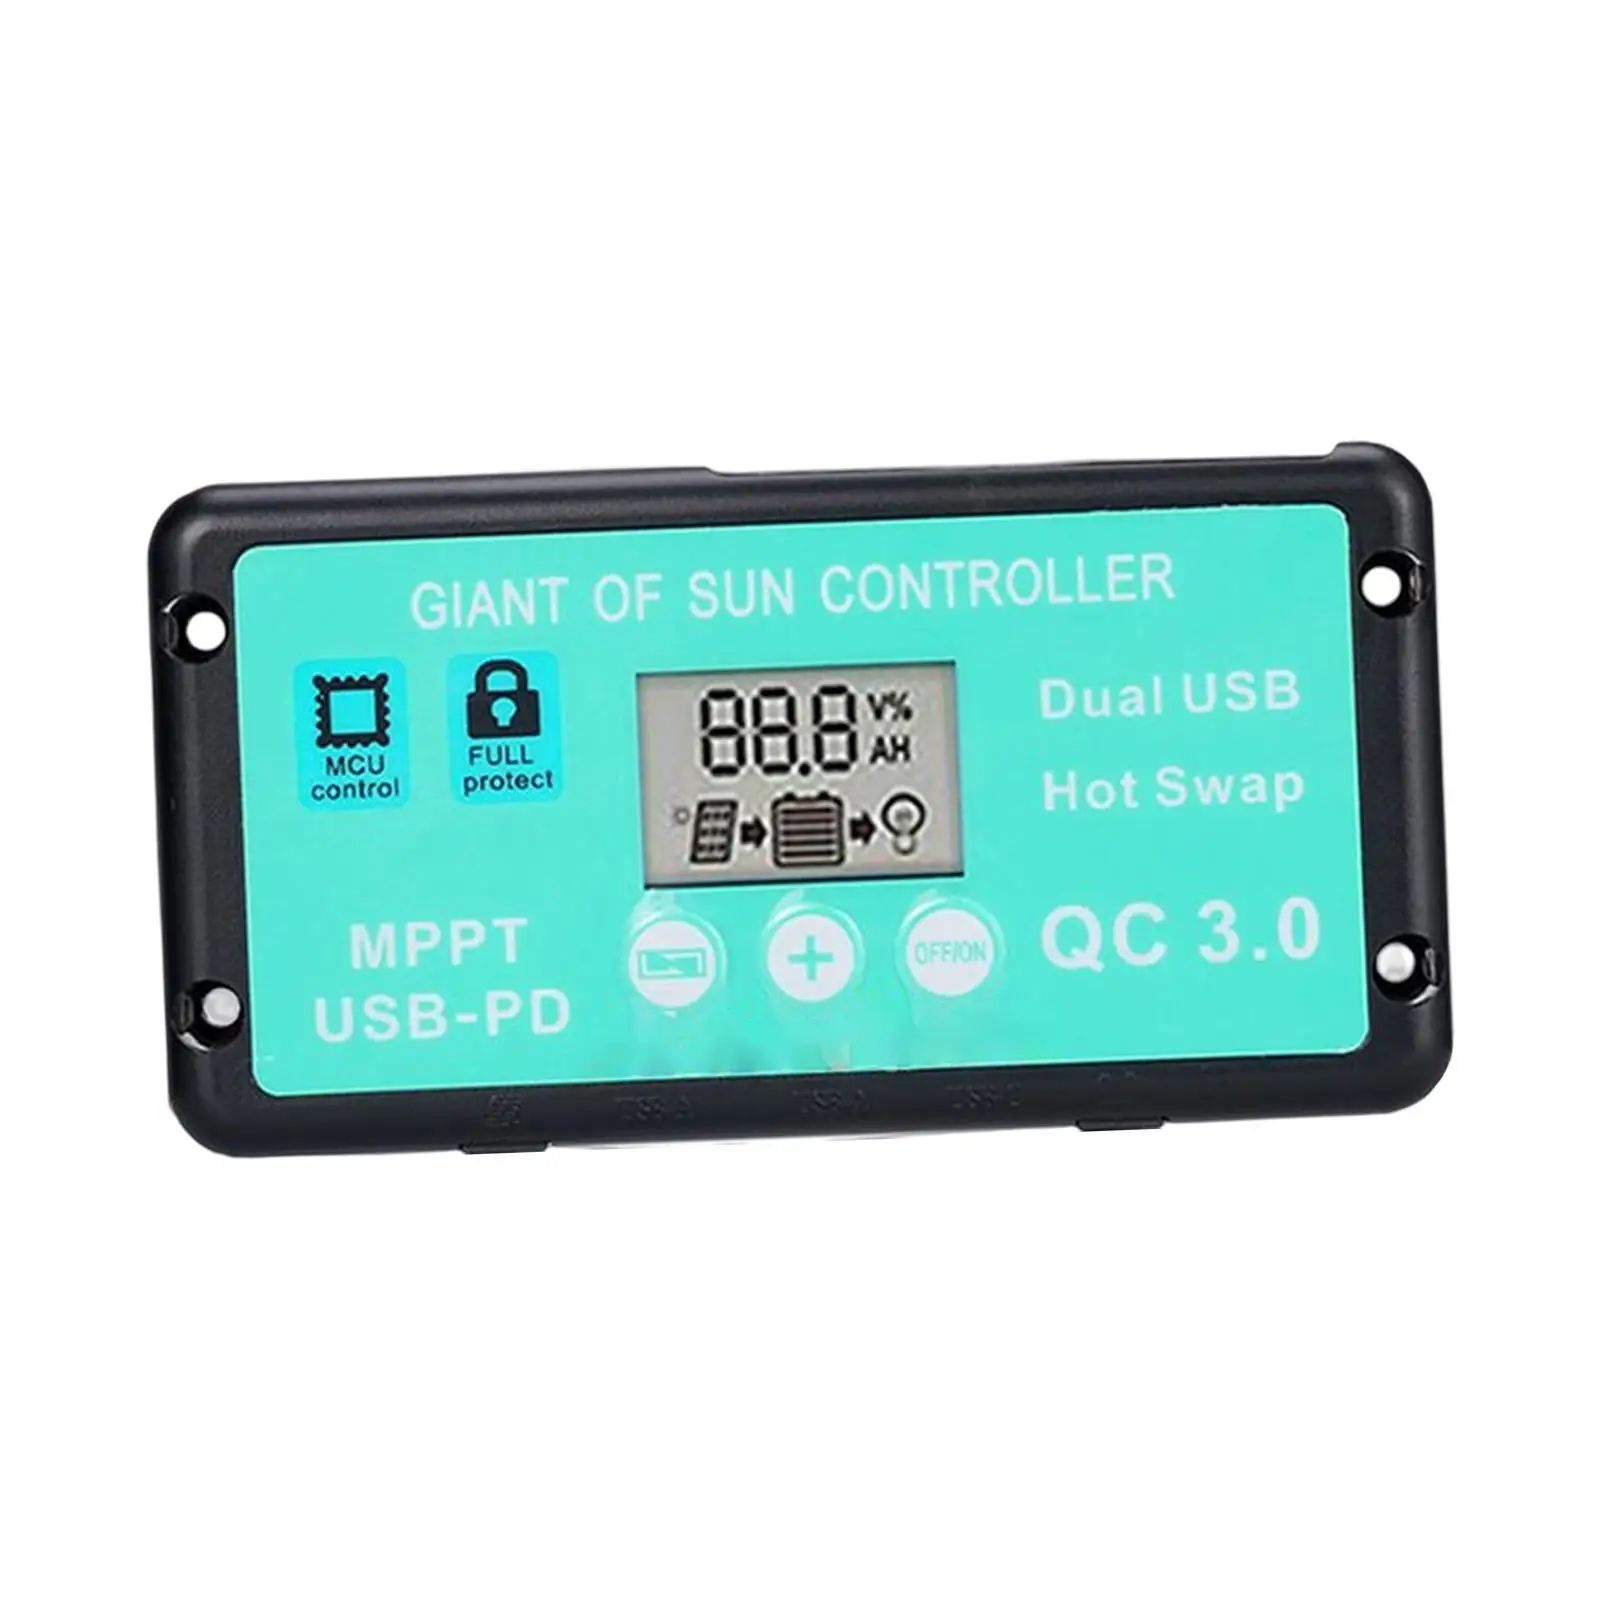 PWM Solar Charge Controller USB Port 100A /60A /30A Solar System with LCD Display for Traveling Hiking Home Outdoor Activities